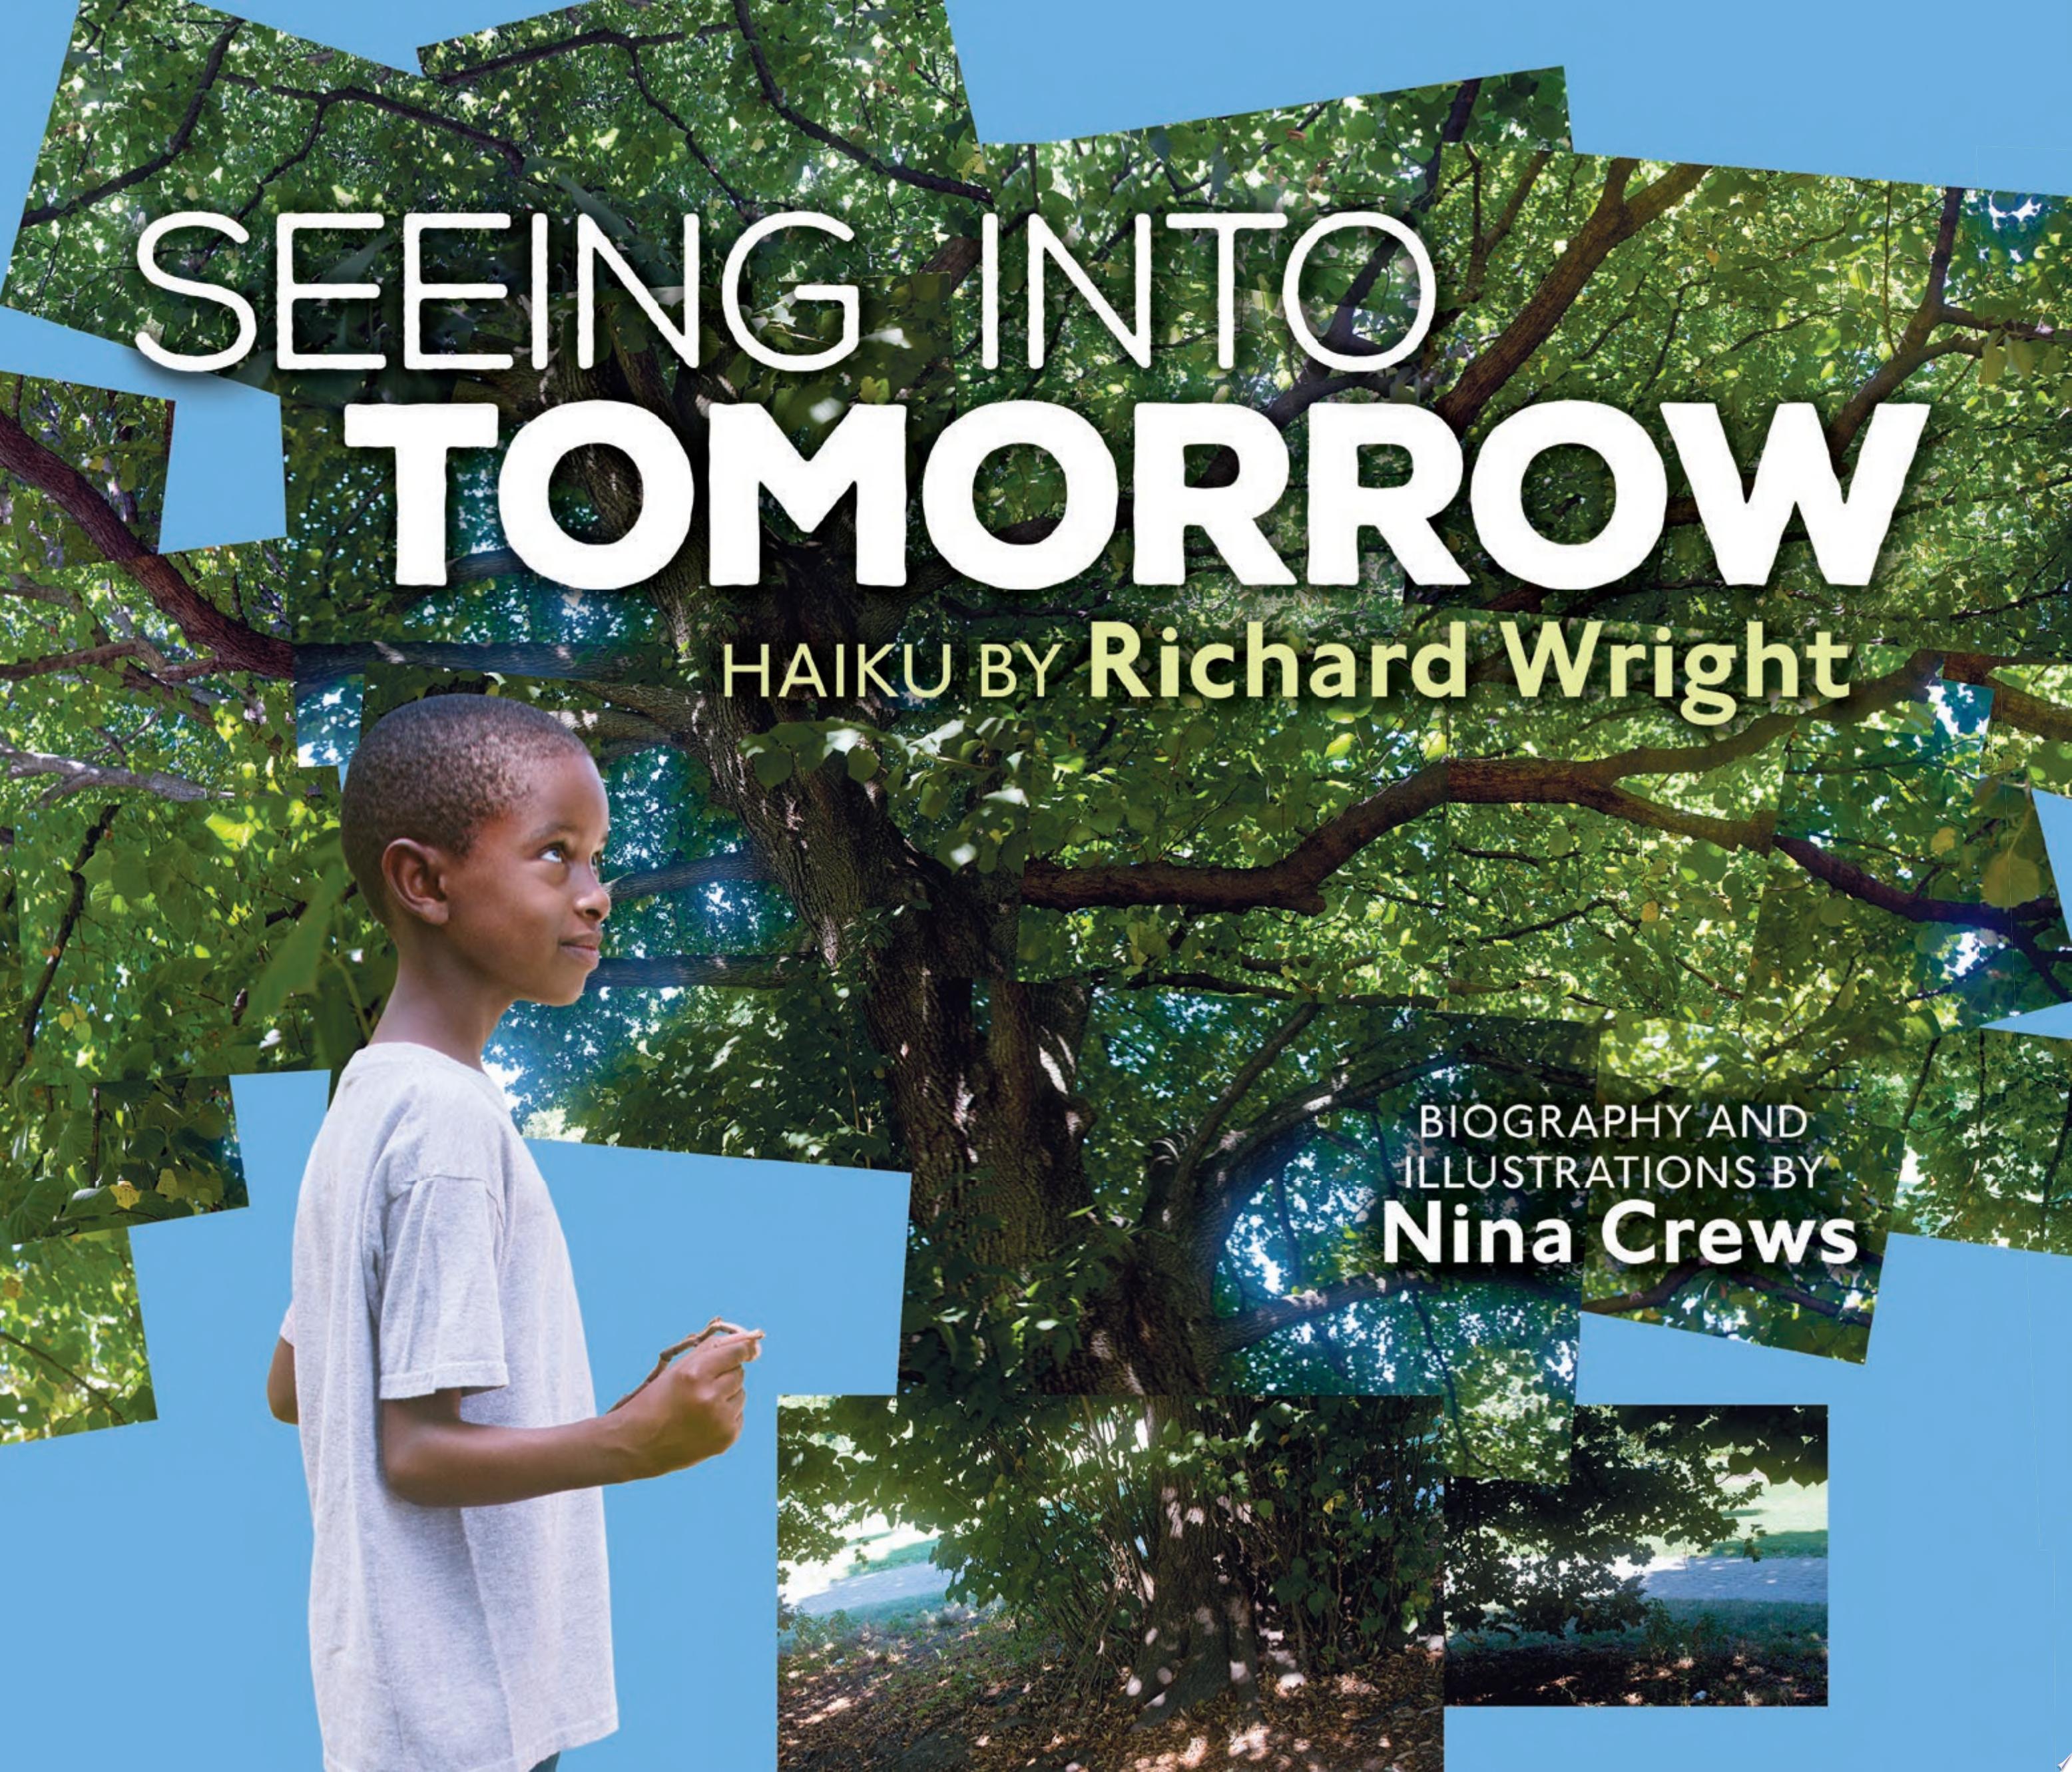 Image for "Seeing Into Tomorrow"